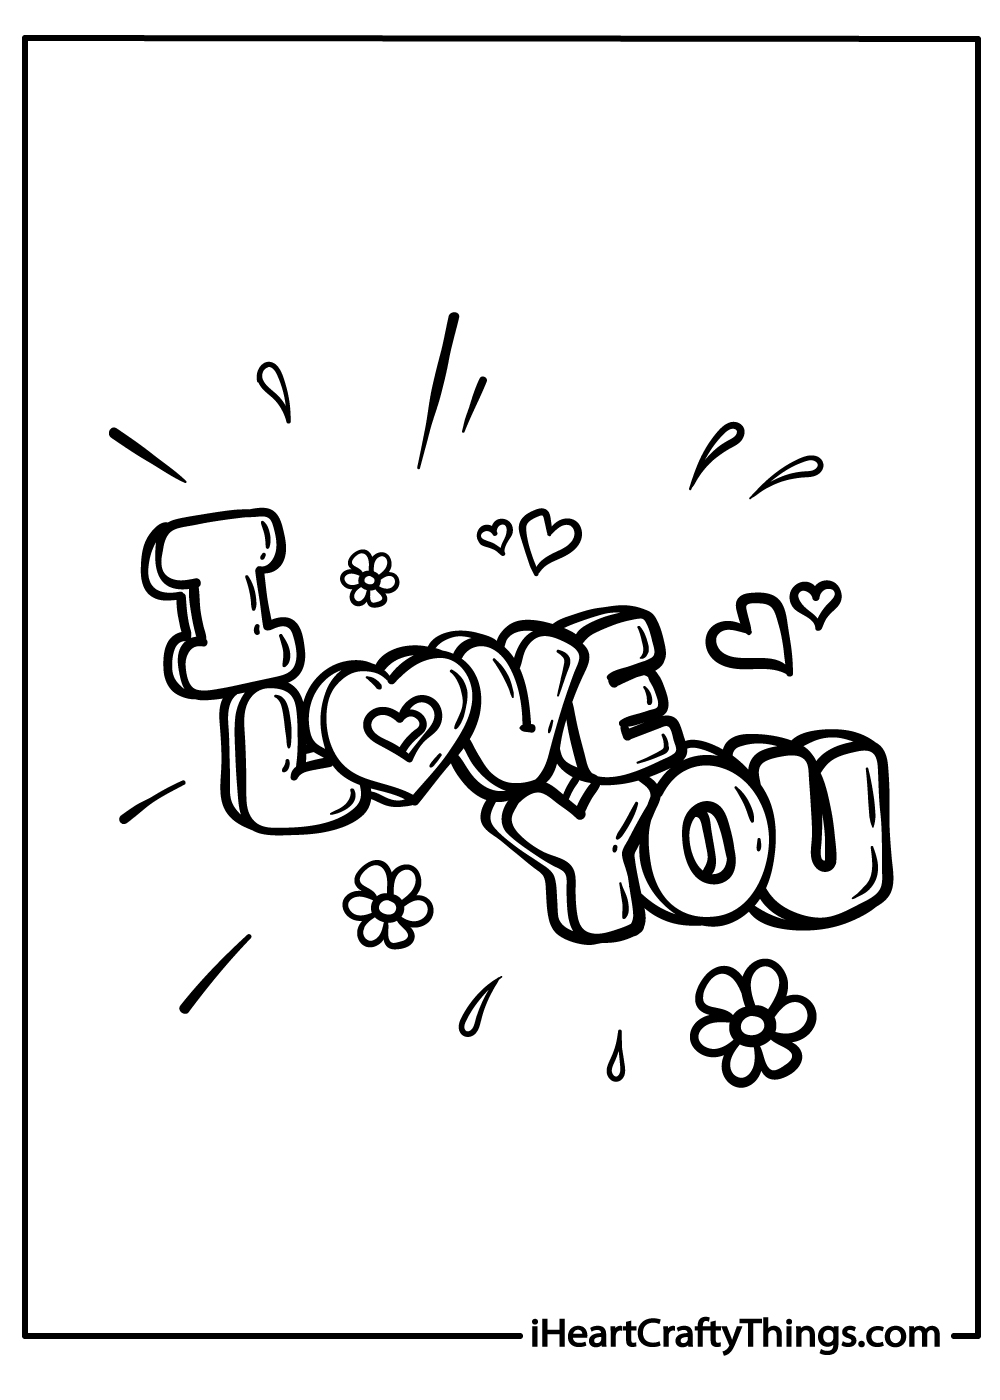 I Love You coloring pages for kids